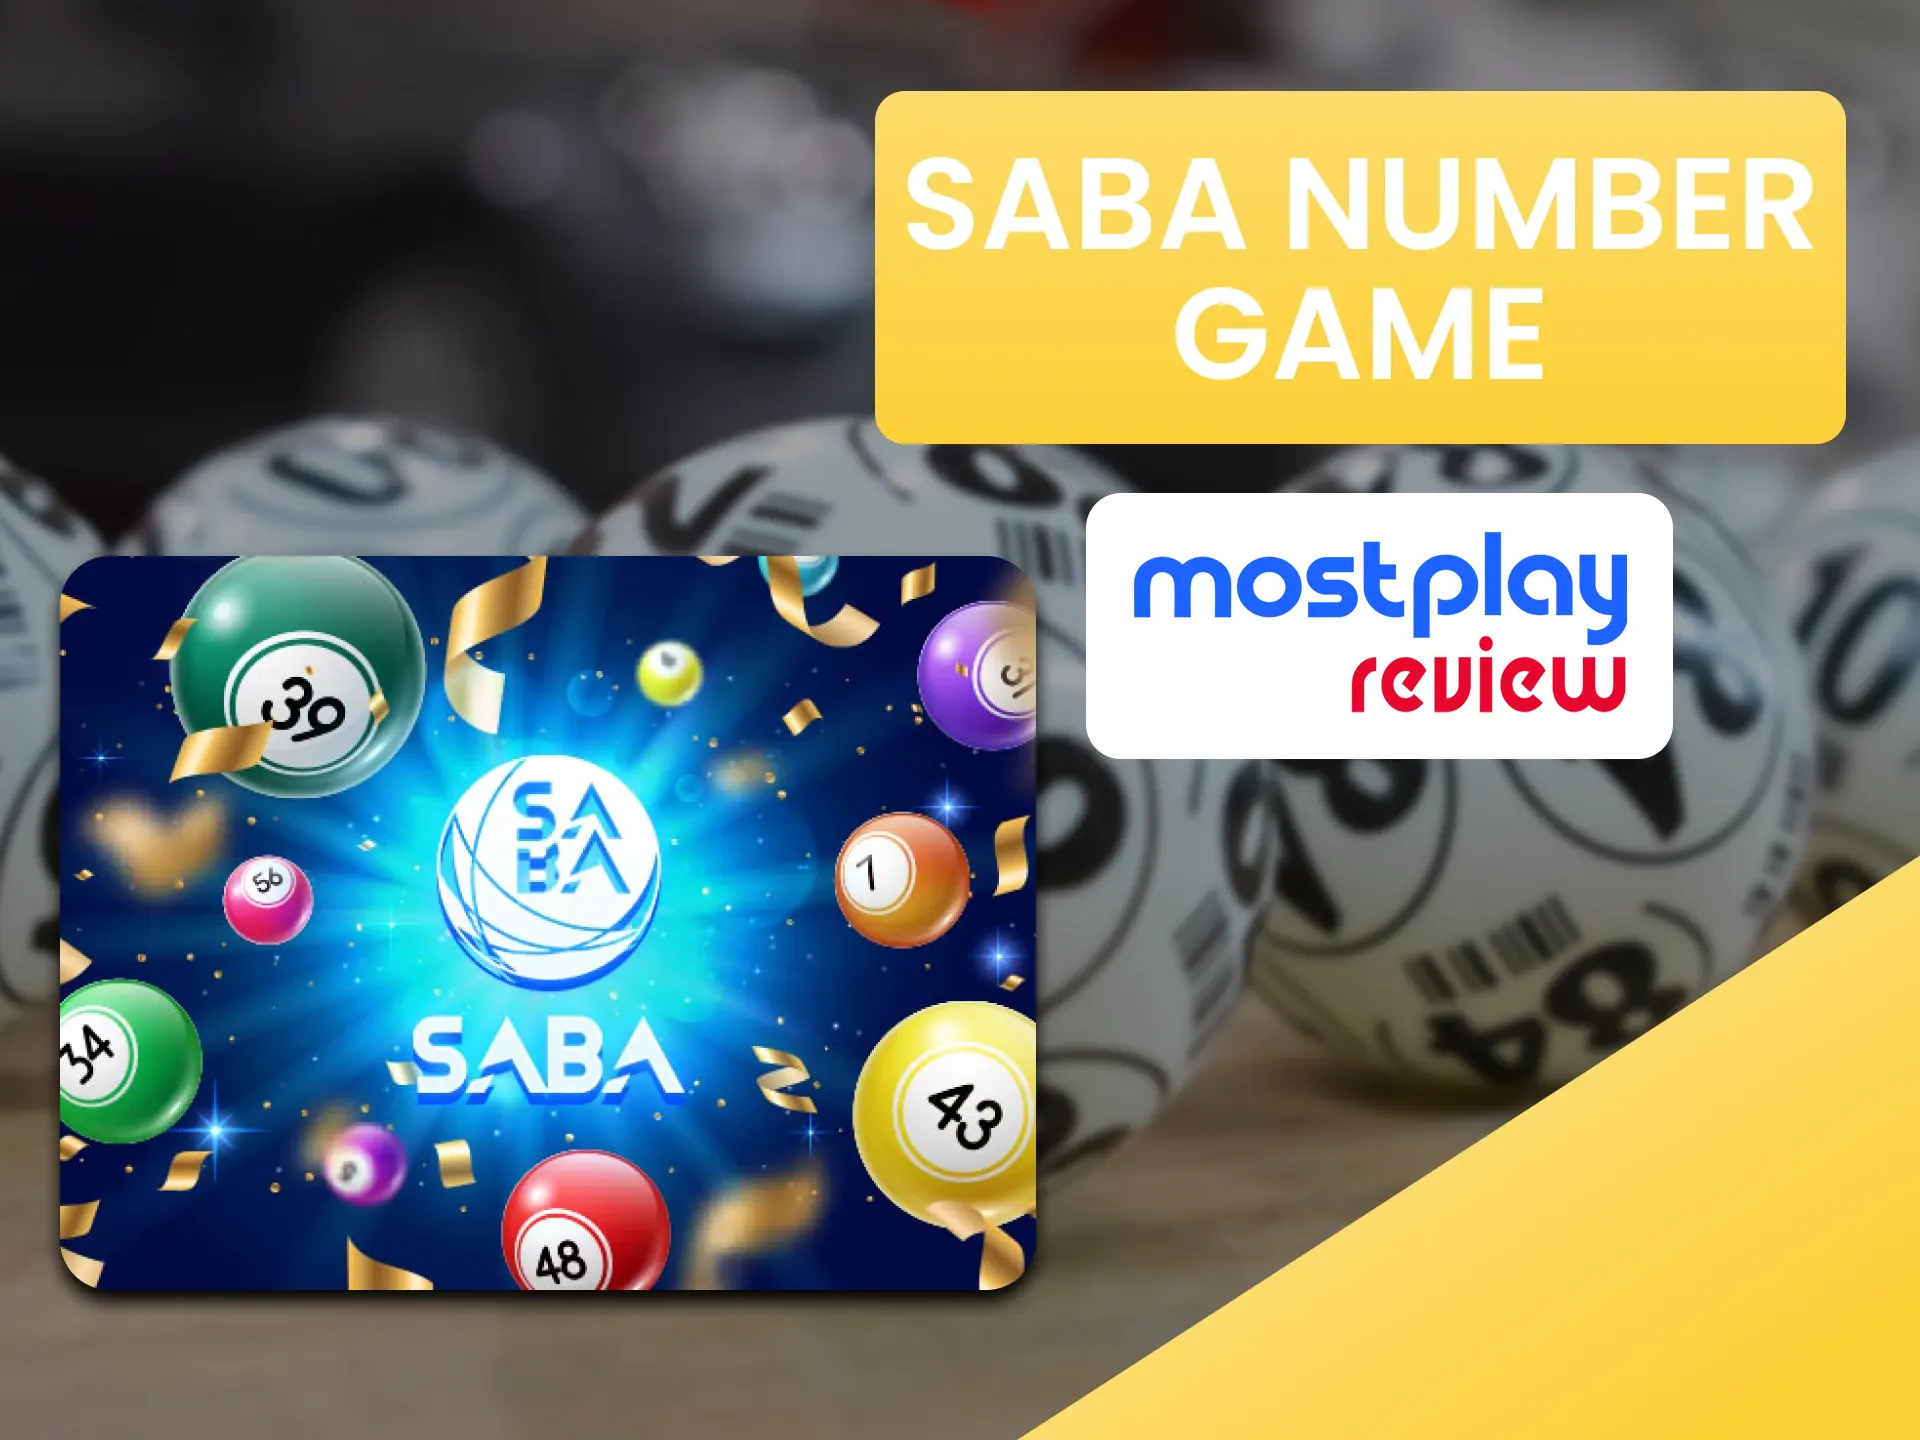 Choose a Number Game for playing at the Mostplay.